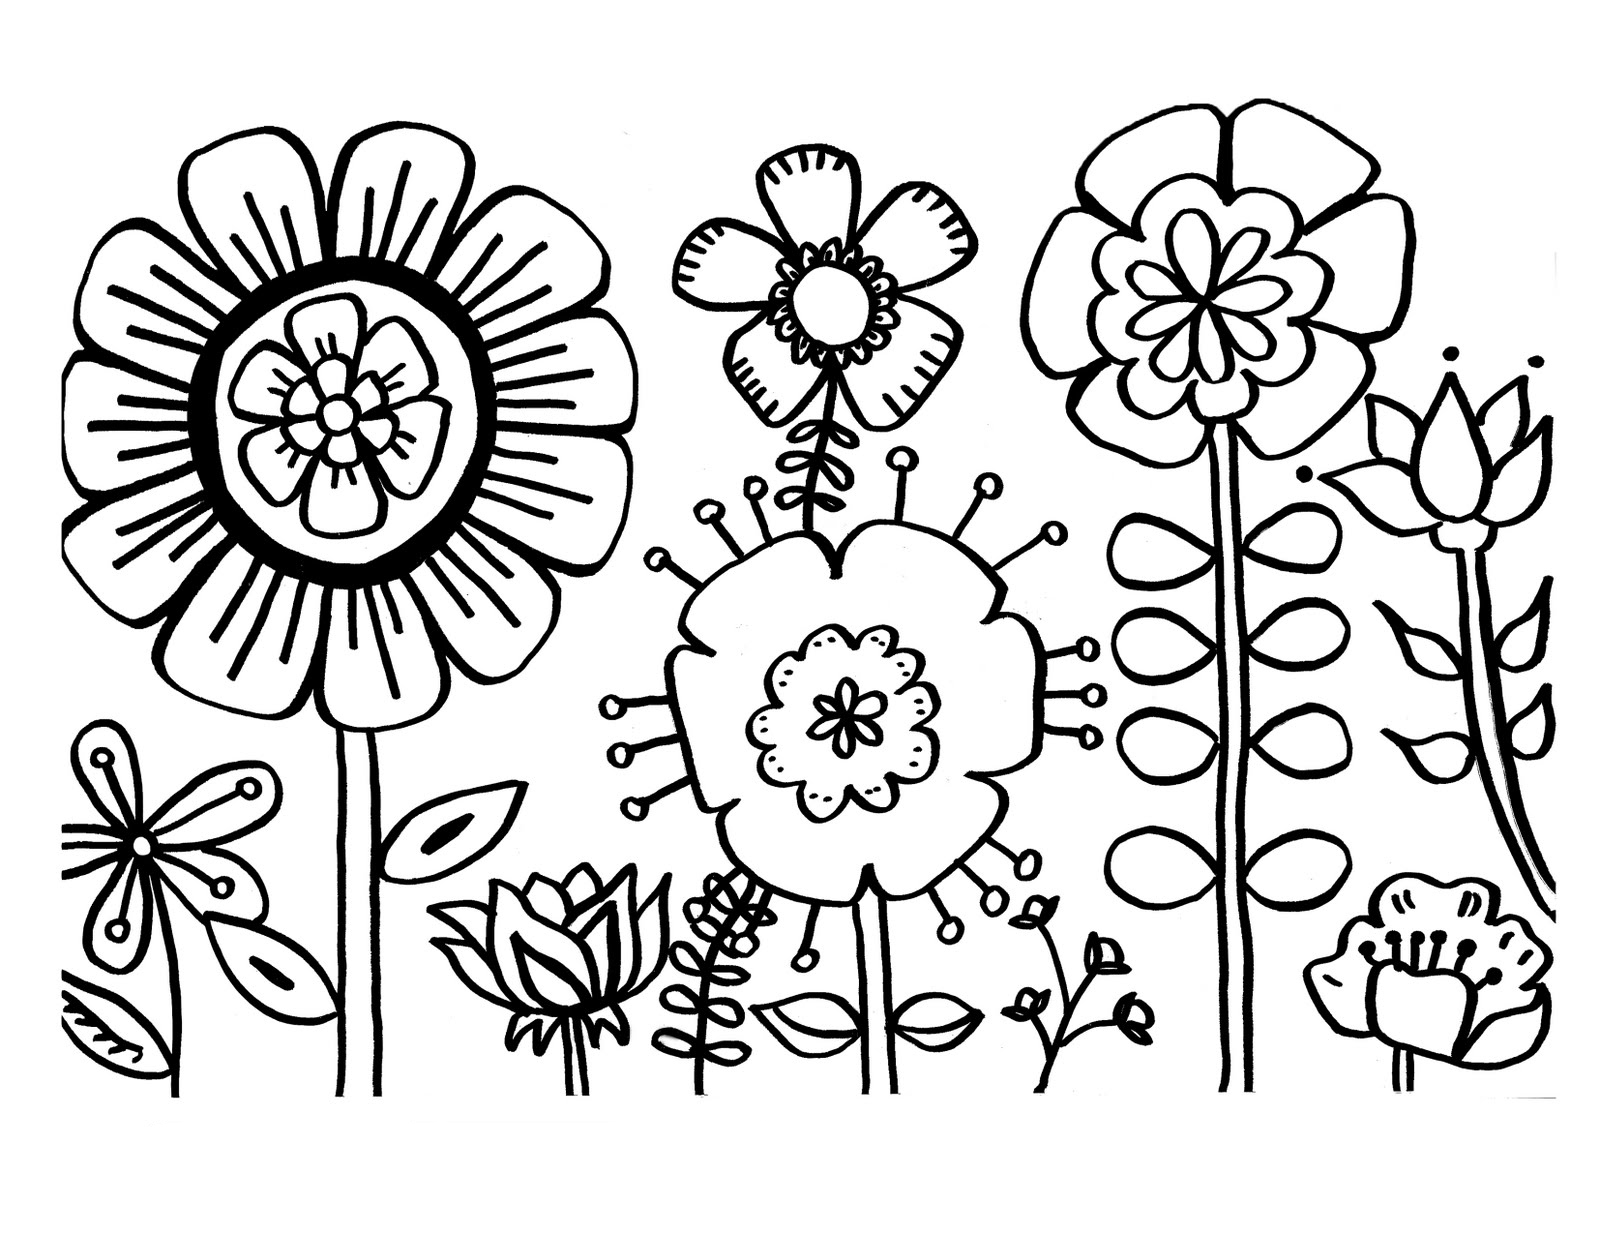 Super Mario Bros. coloring pages - Free 25+ Free Printable Flower Patterns To Color